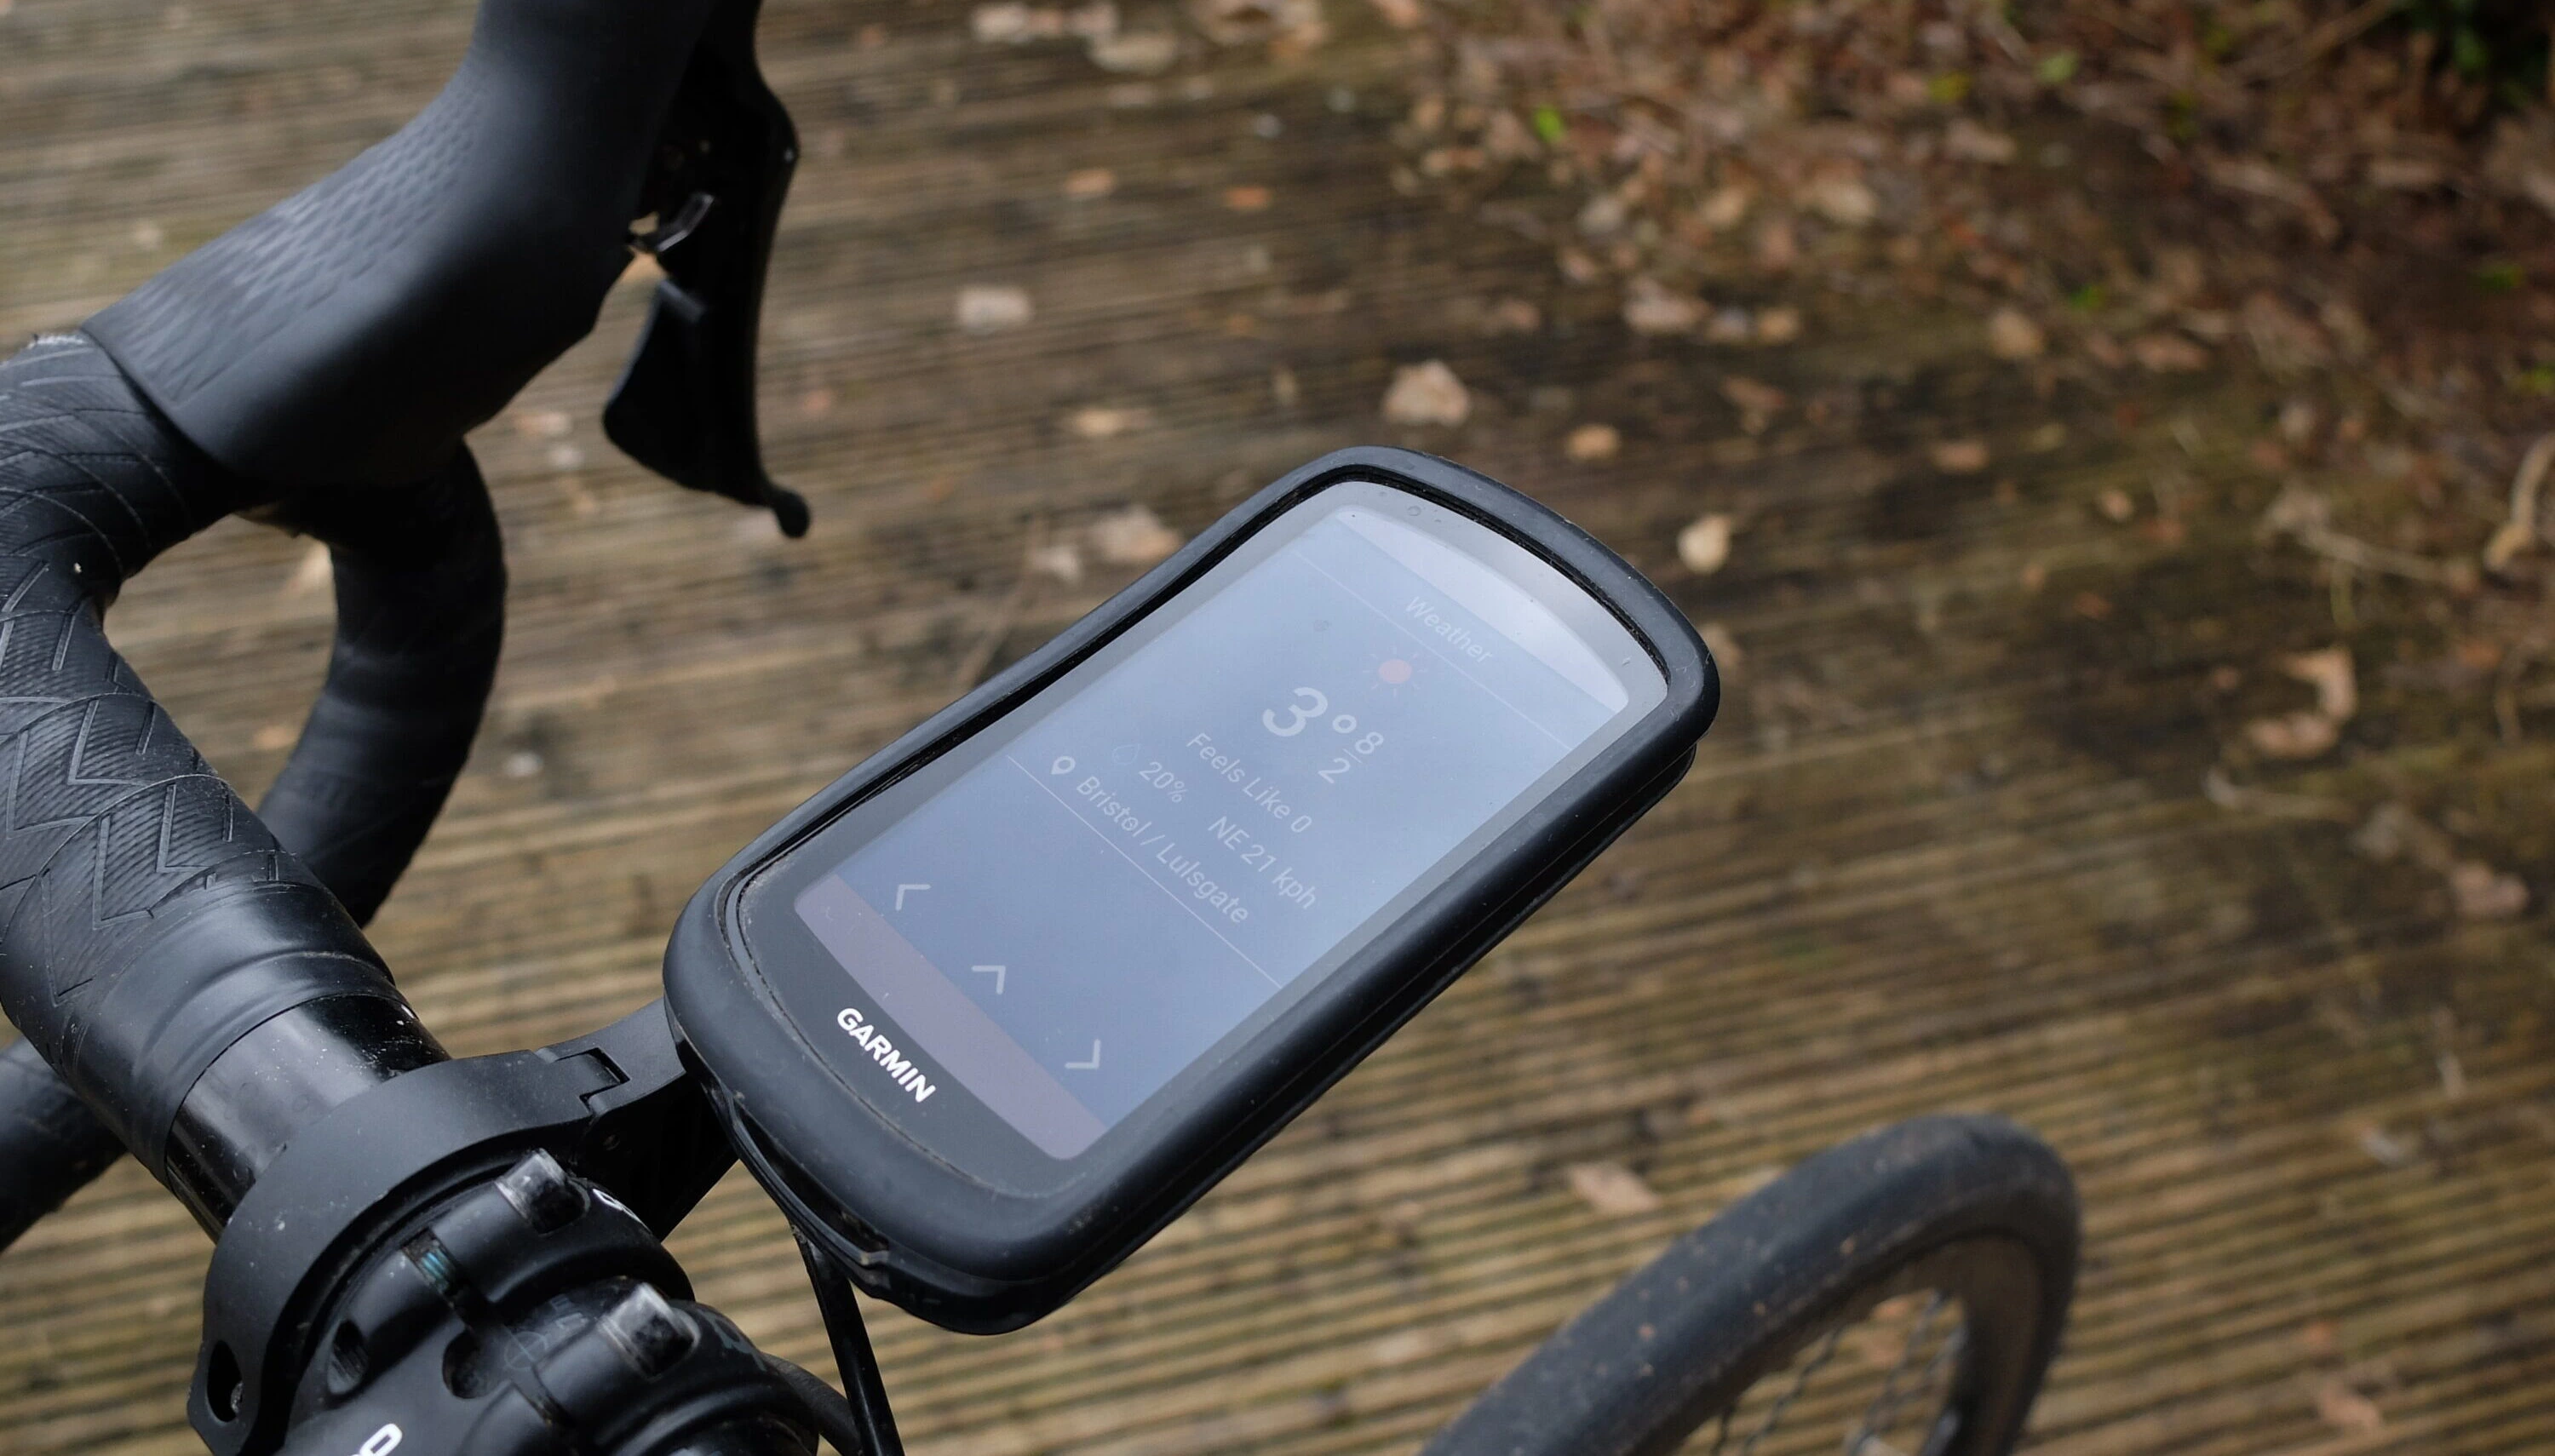 Garmin's new flagship Edge 1040 brings solar power to bike computers,  promises greater accuracy and new training metrics